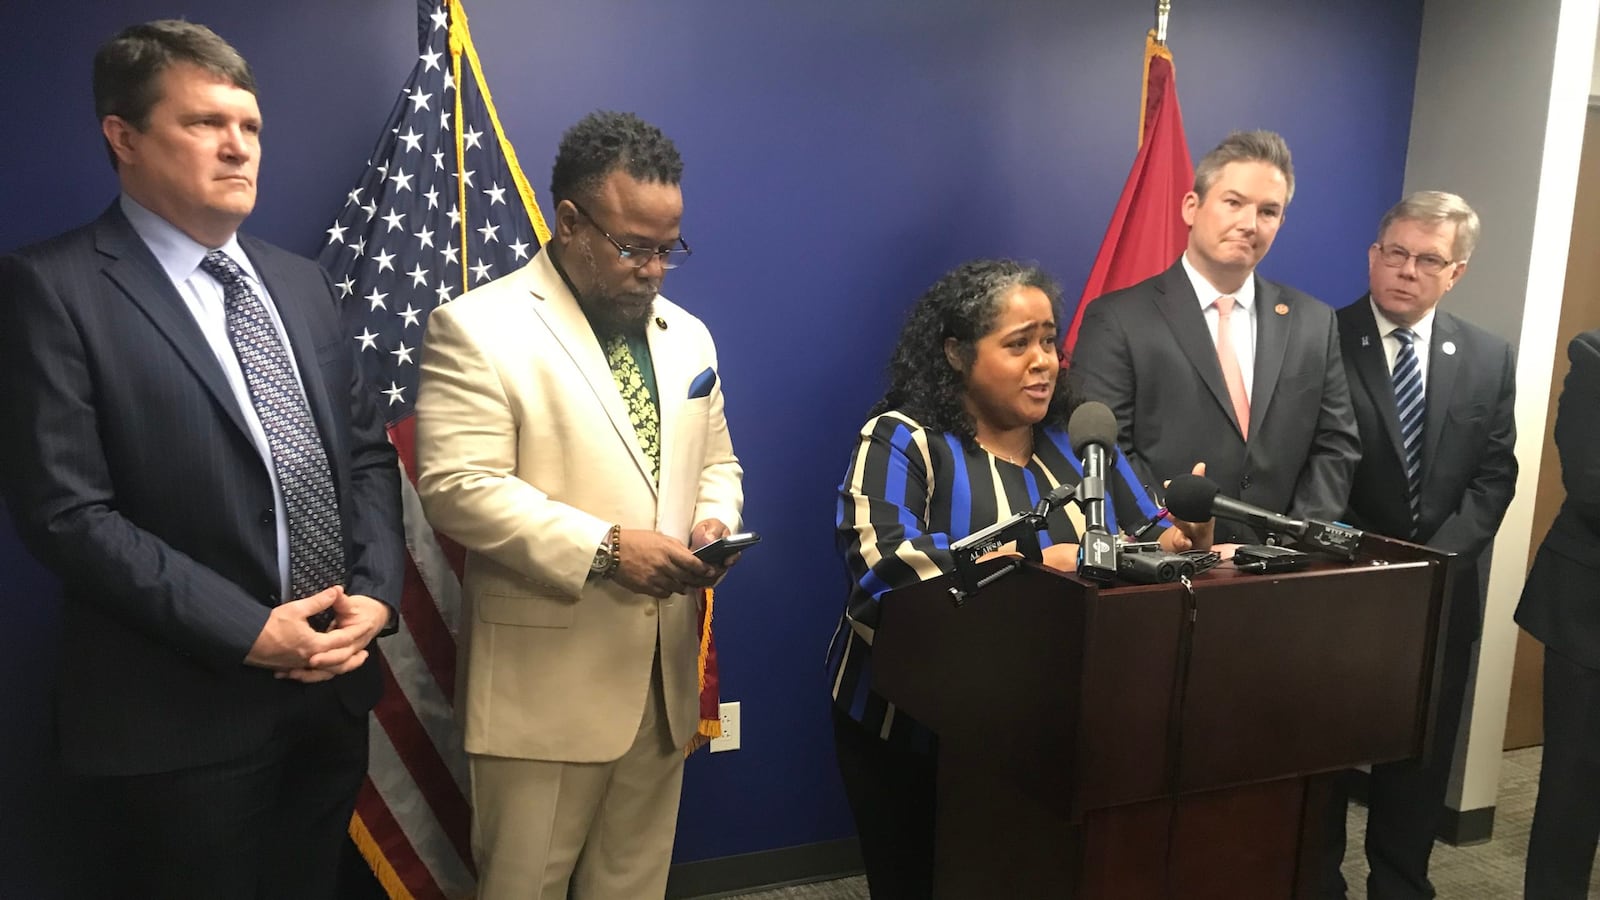 Sen. Raumesh Akbari of Memphis speaks Wednesday during a news conference in which Democrats blasted the state's level of funding for Tennessee public schools. From left: Rep. Mike Stewart of Nashville, Rep. Antonio Parkinson of Memphis, Akbari, Sen. Jeff Yarbro of Nashville, and Rep. Dwayne Thompson of Cordova.